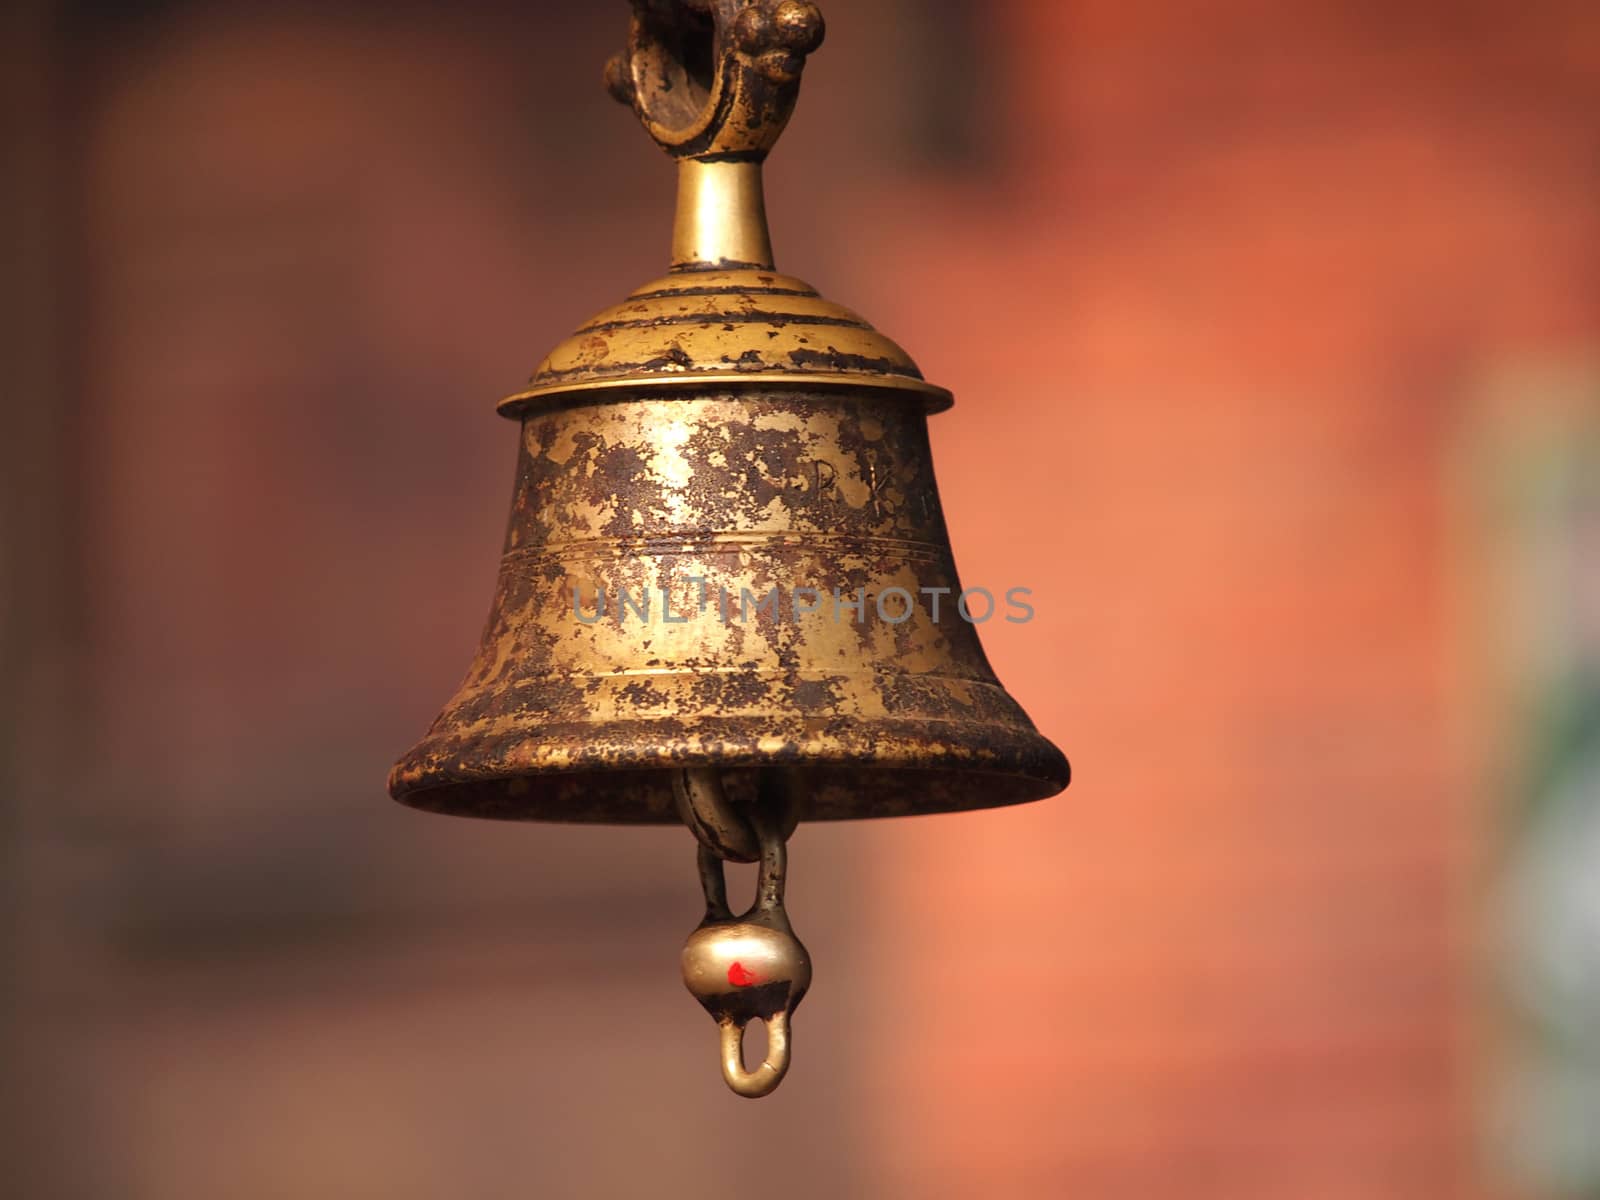 bronze bell by nevenm